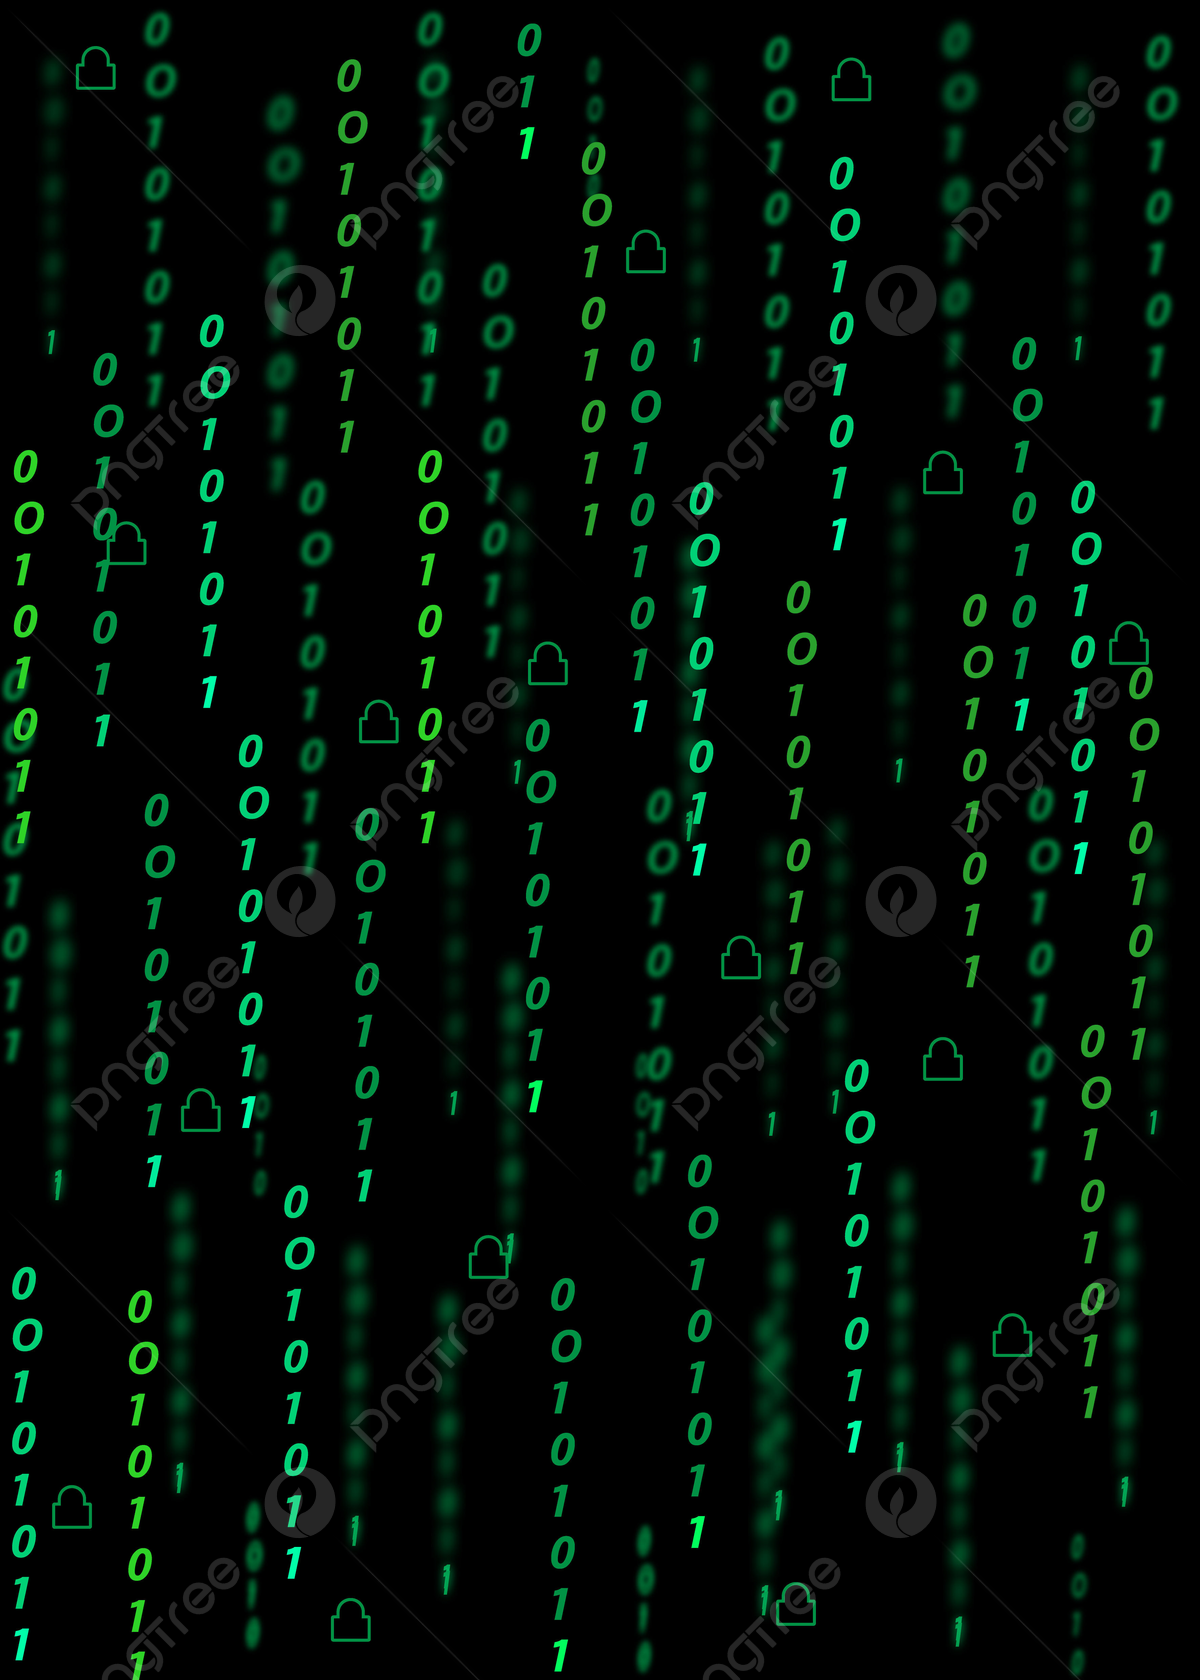 Matrix Wallpaper With Green Binary Number And Lock Background, Matrix, Science Wallpaper, Binary Number Background Image for Free Download